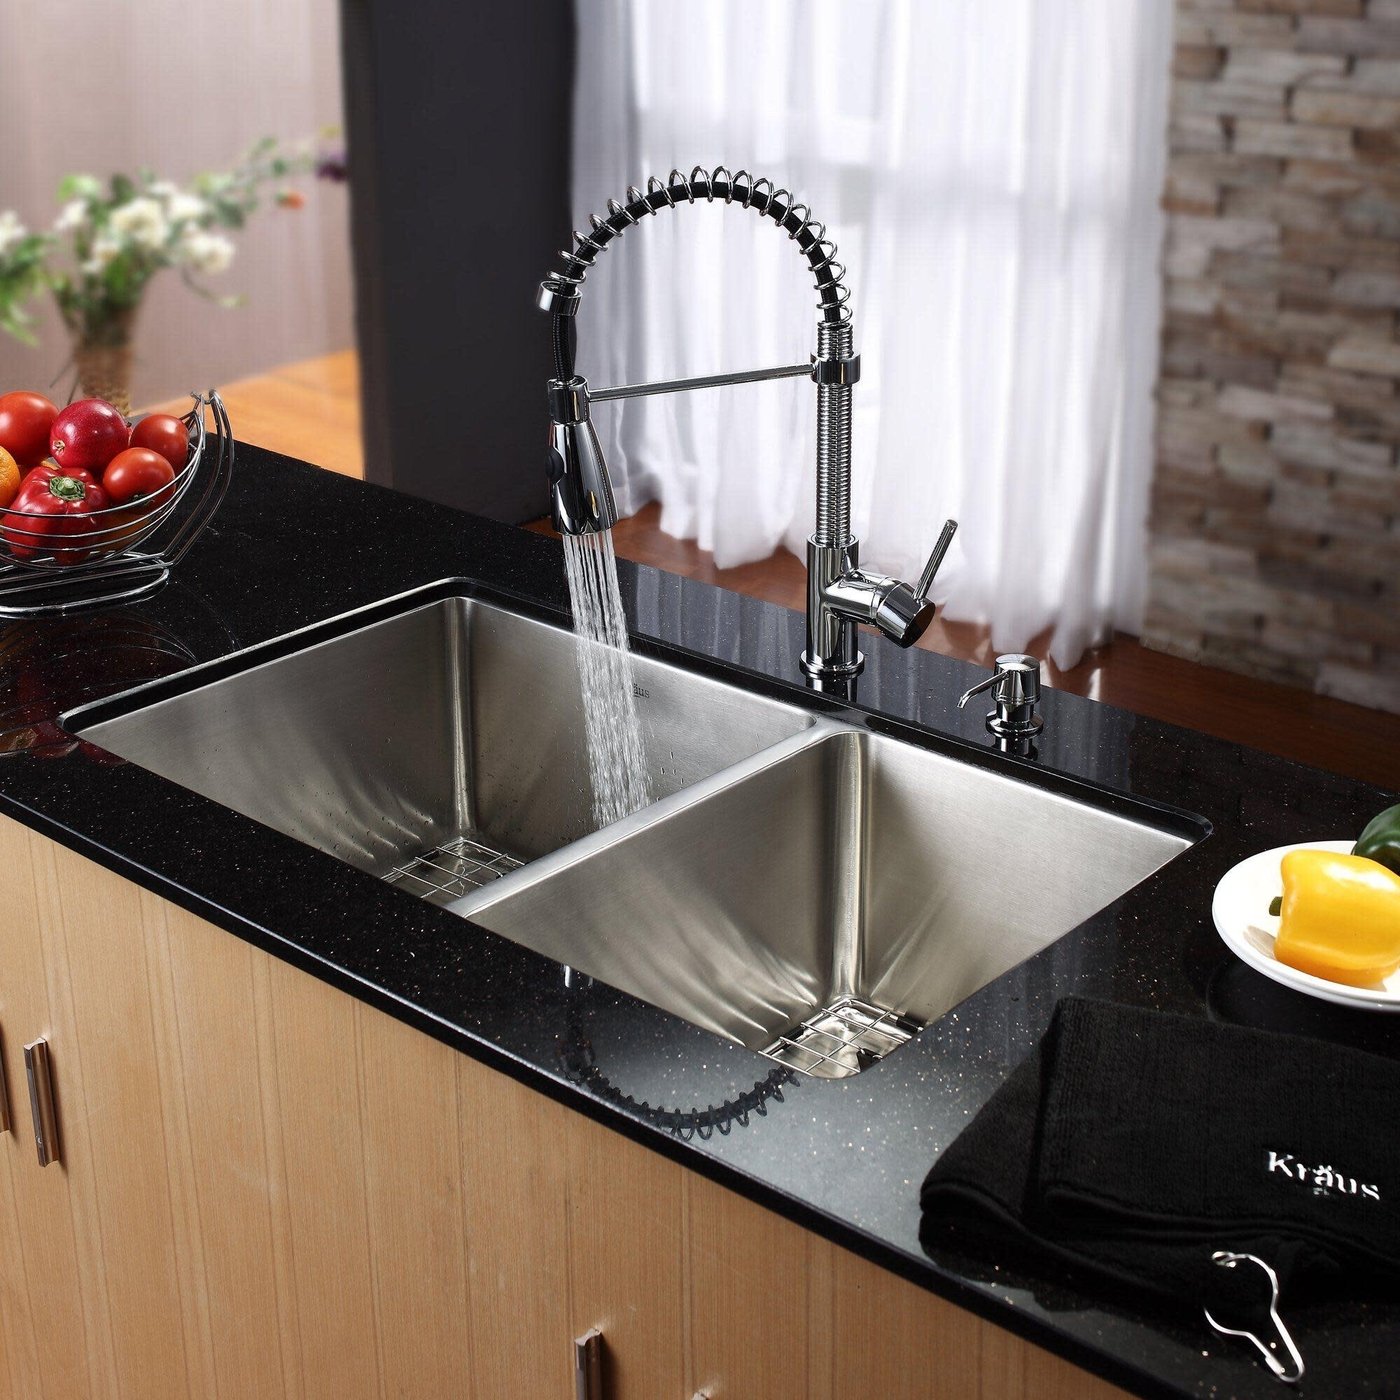 7 Expert Tips To Choose A Kitchen Sink - VisualHunt